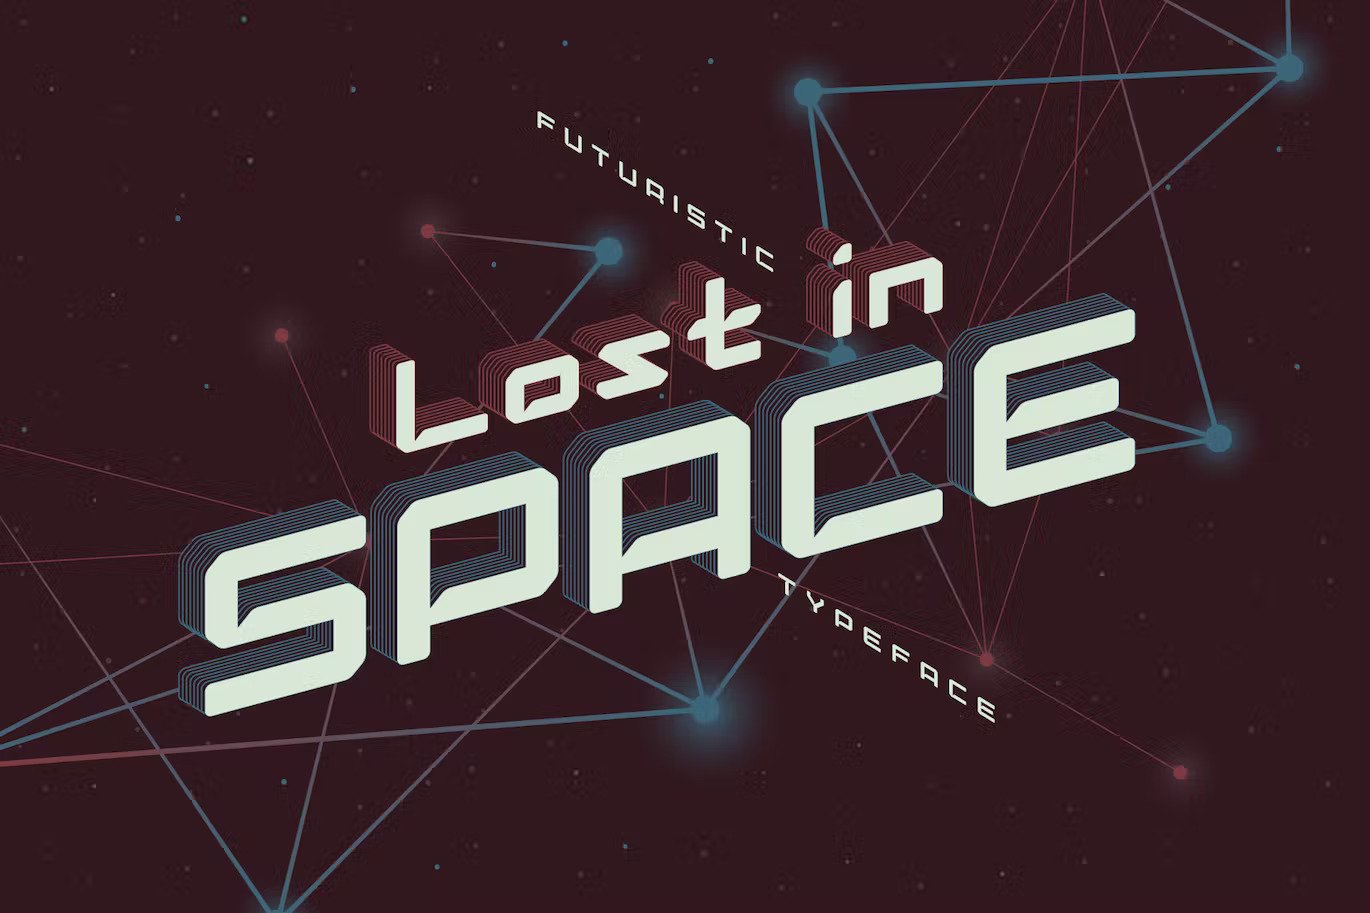 A futuristic space style typeface